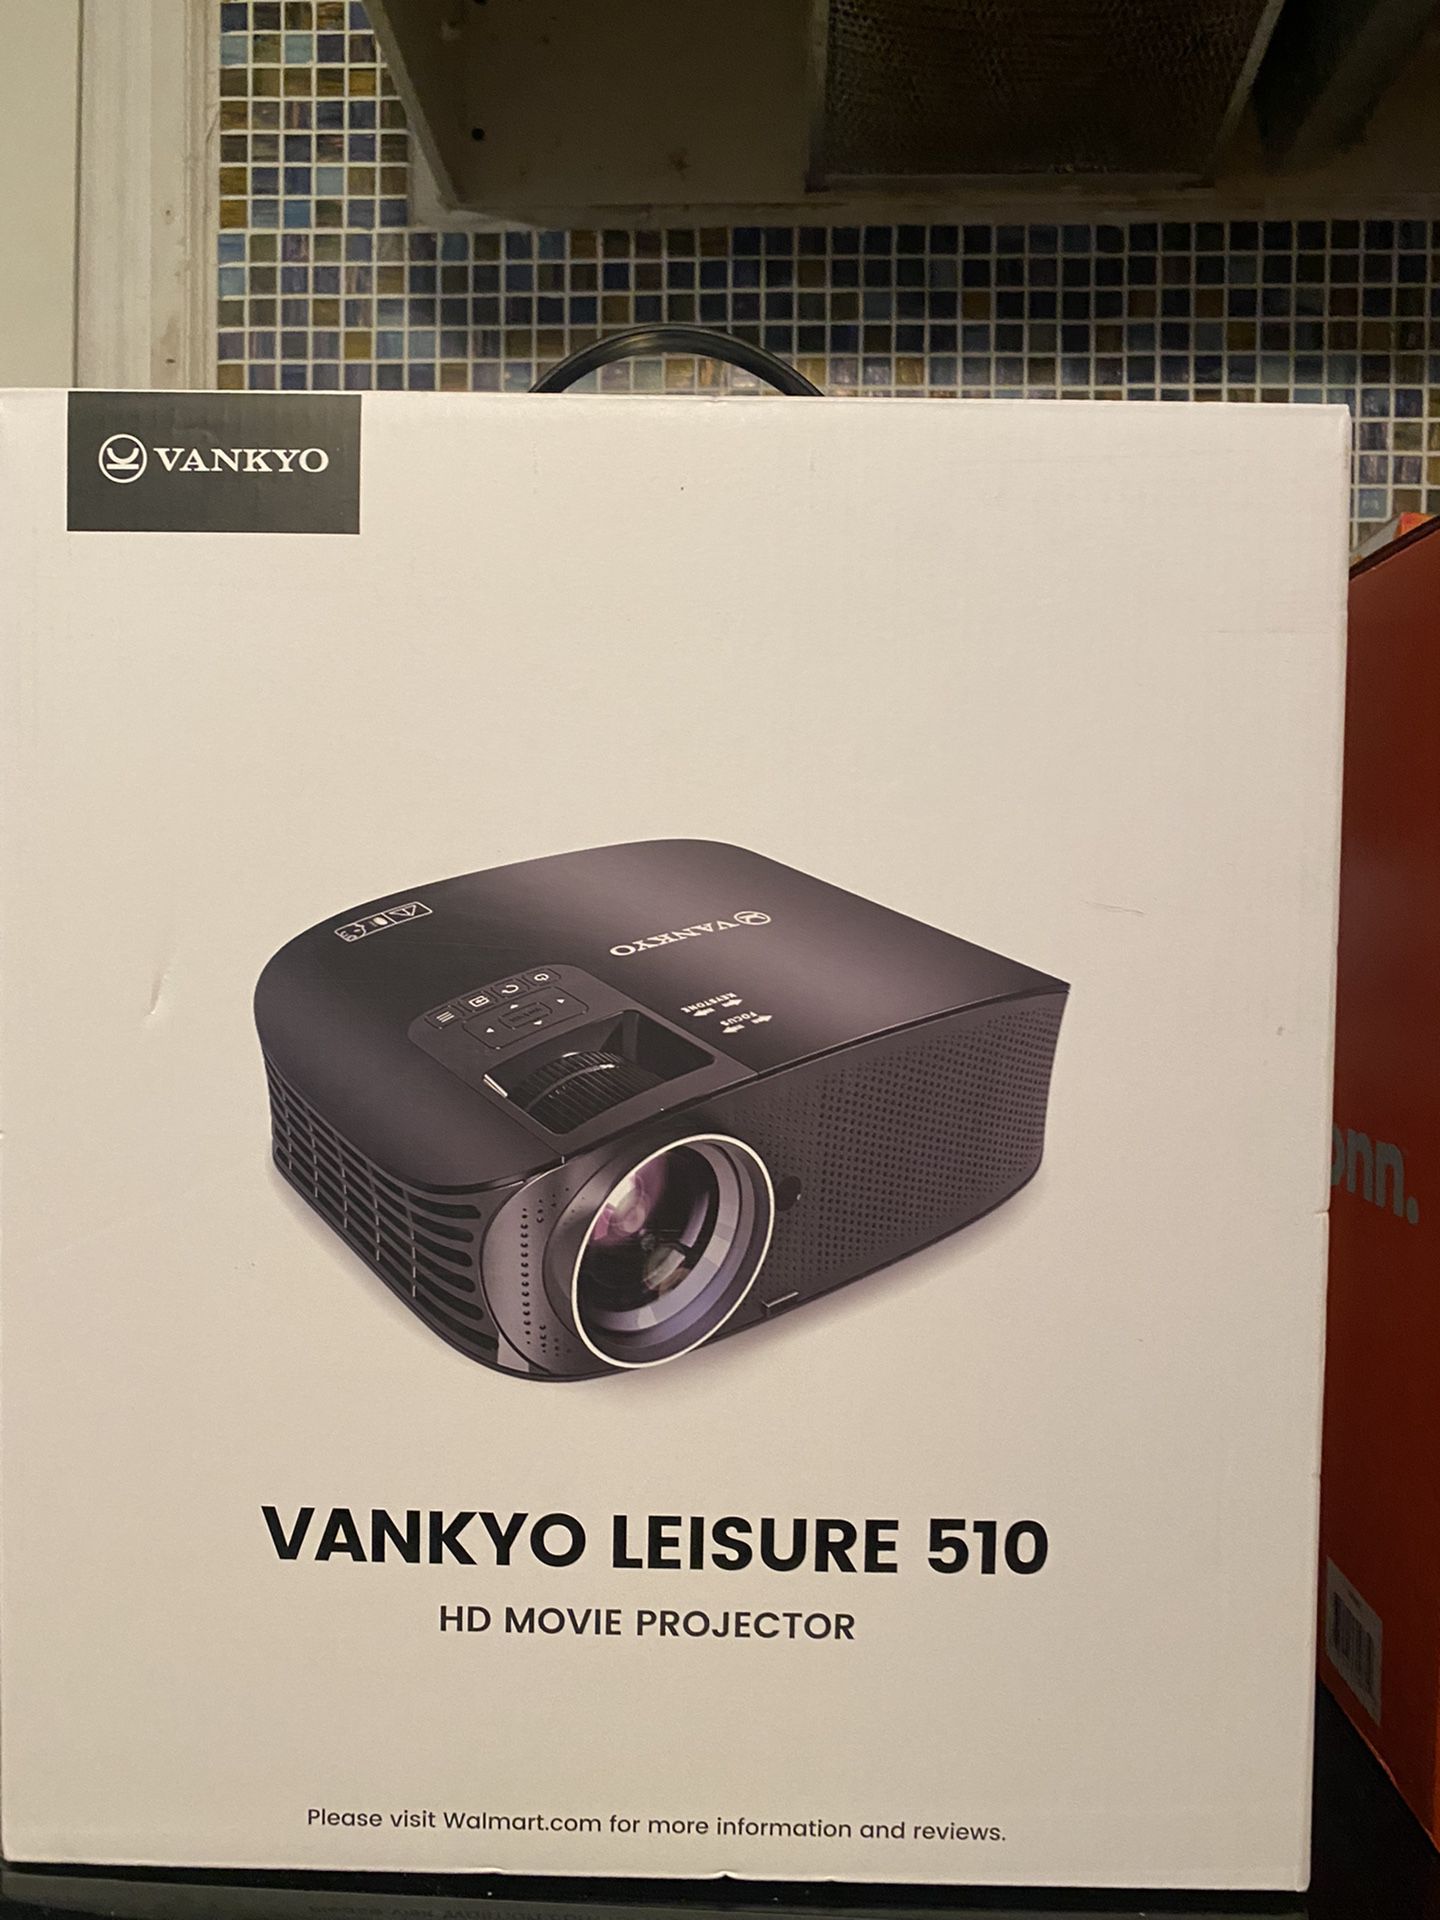 Brand New Vankyo Leisure 510 HD Movie Projector (230” projection size) 